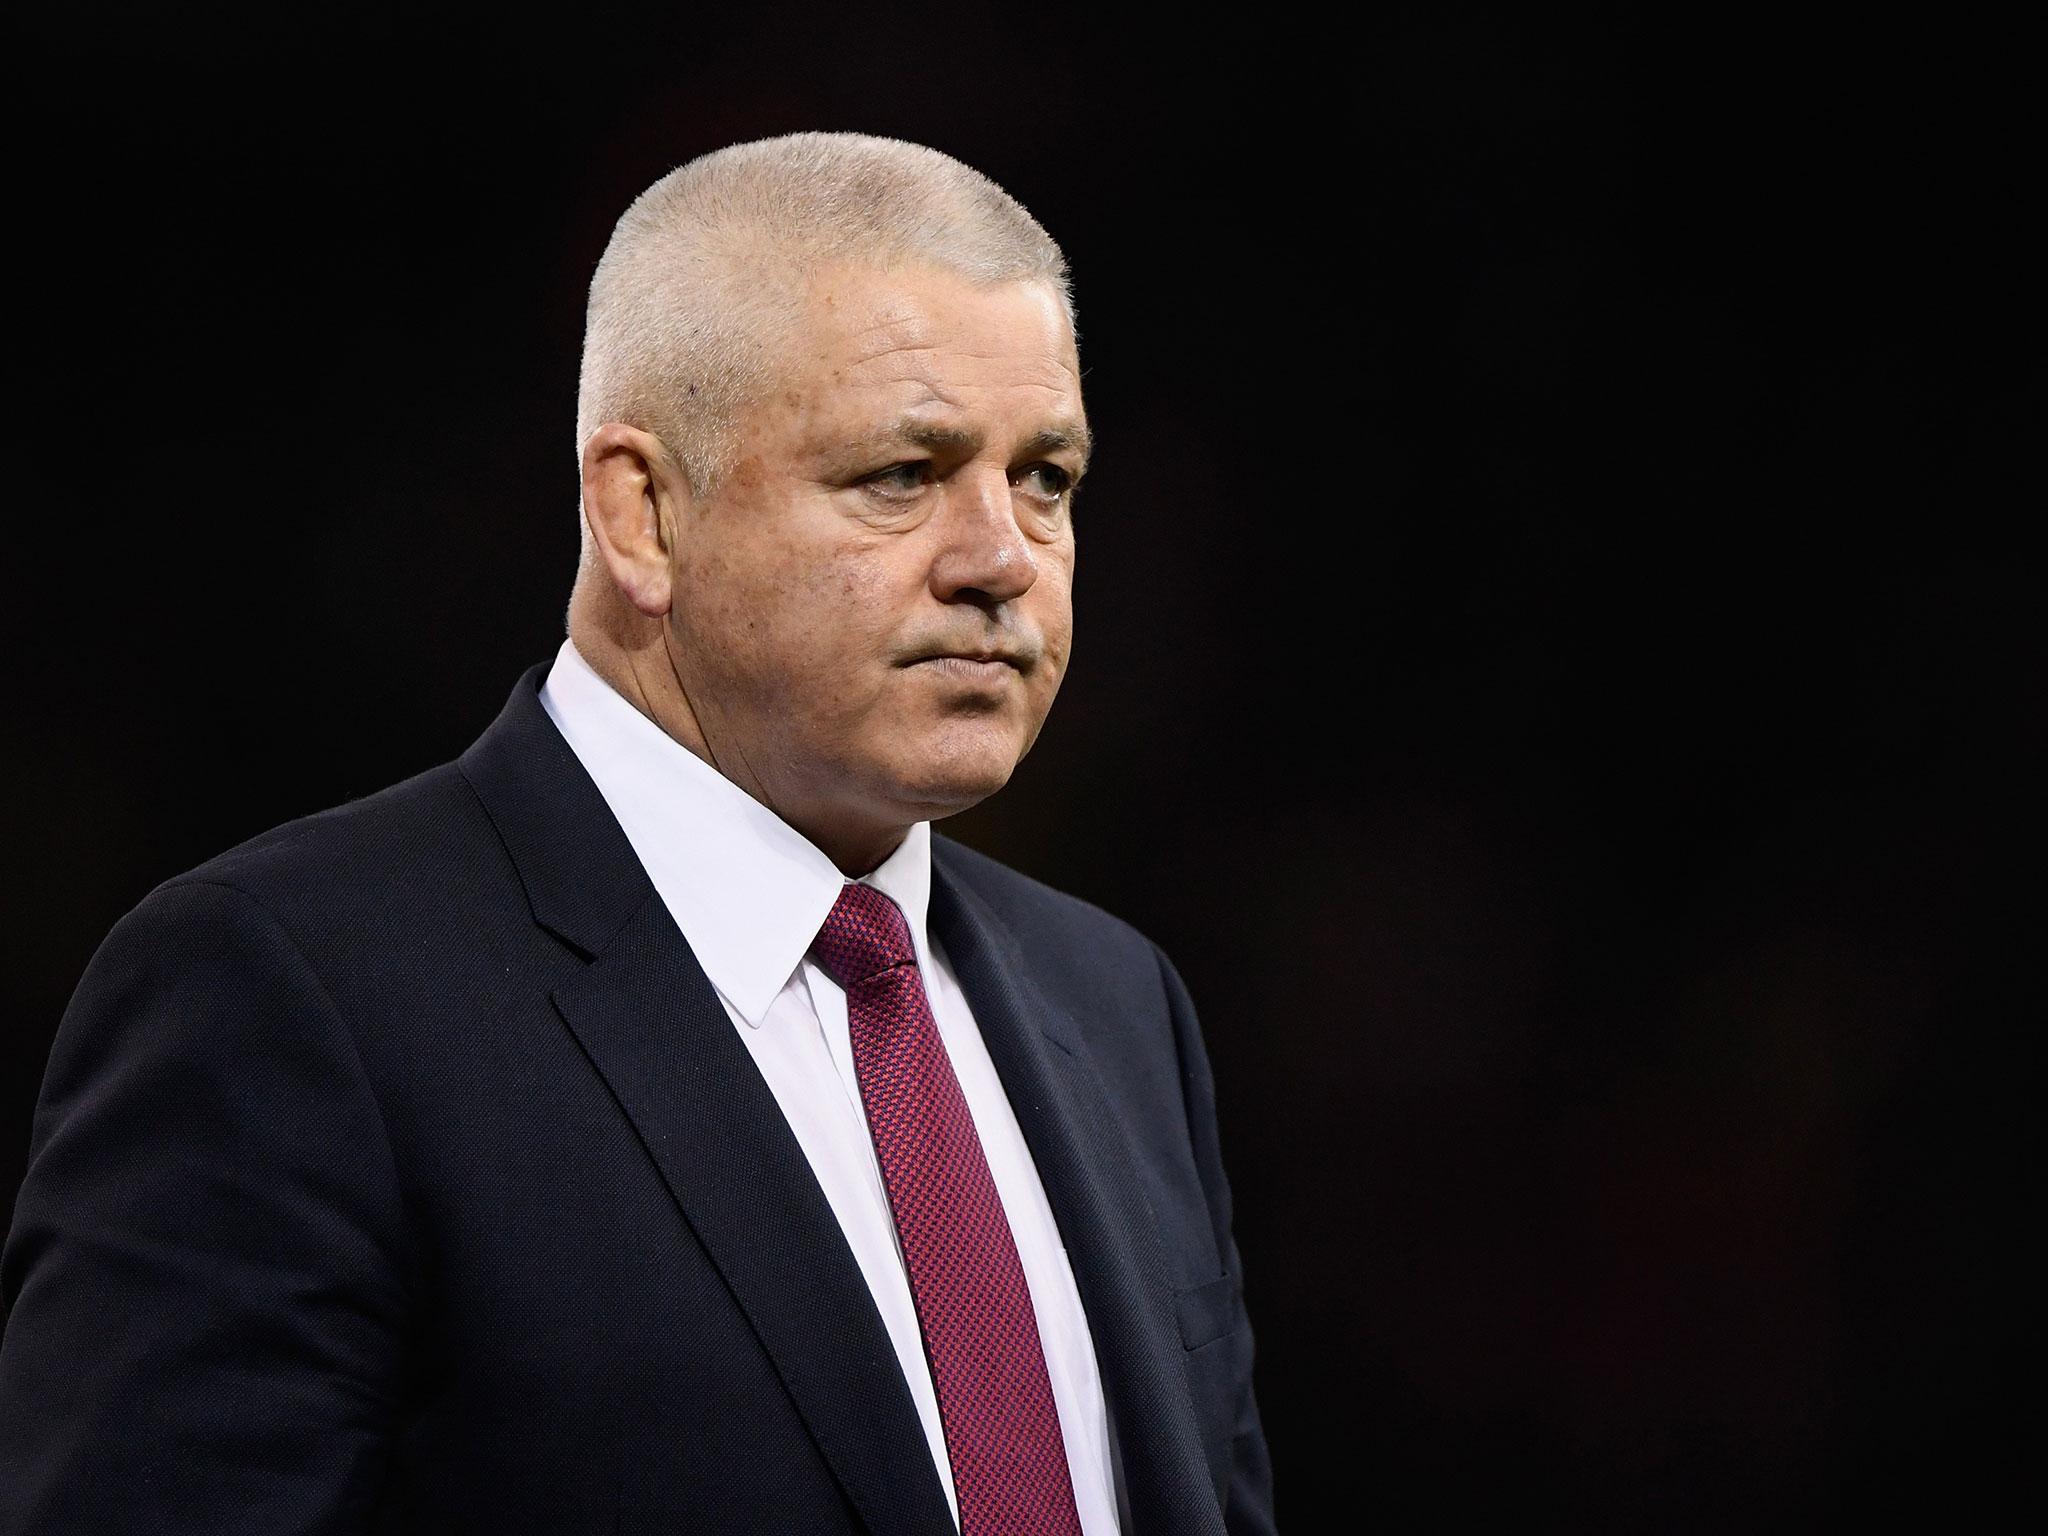 Warren Gatland was positive after Wales beat South Africa - but he has plenty more work to do